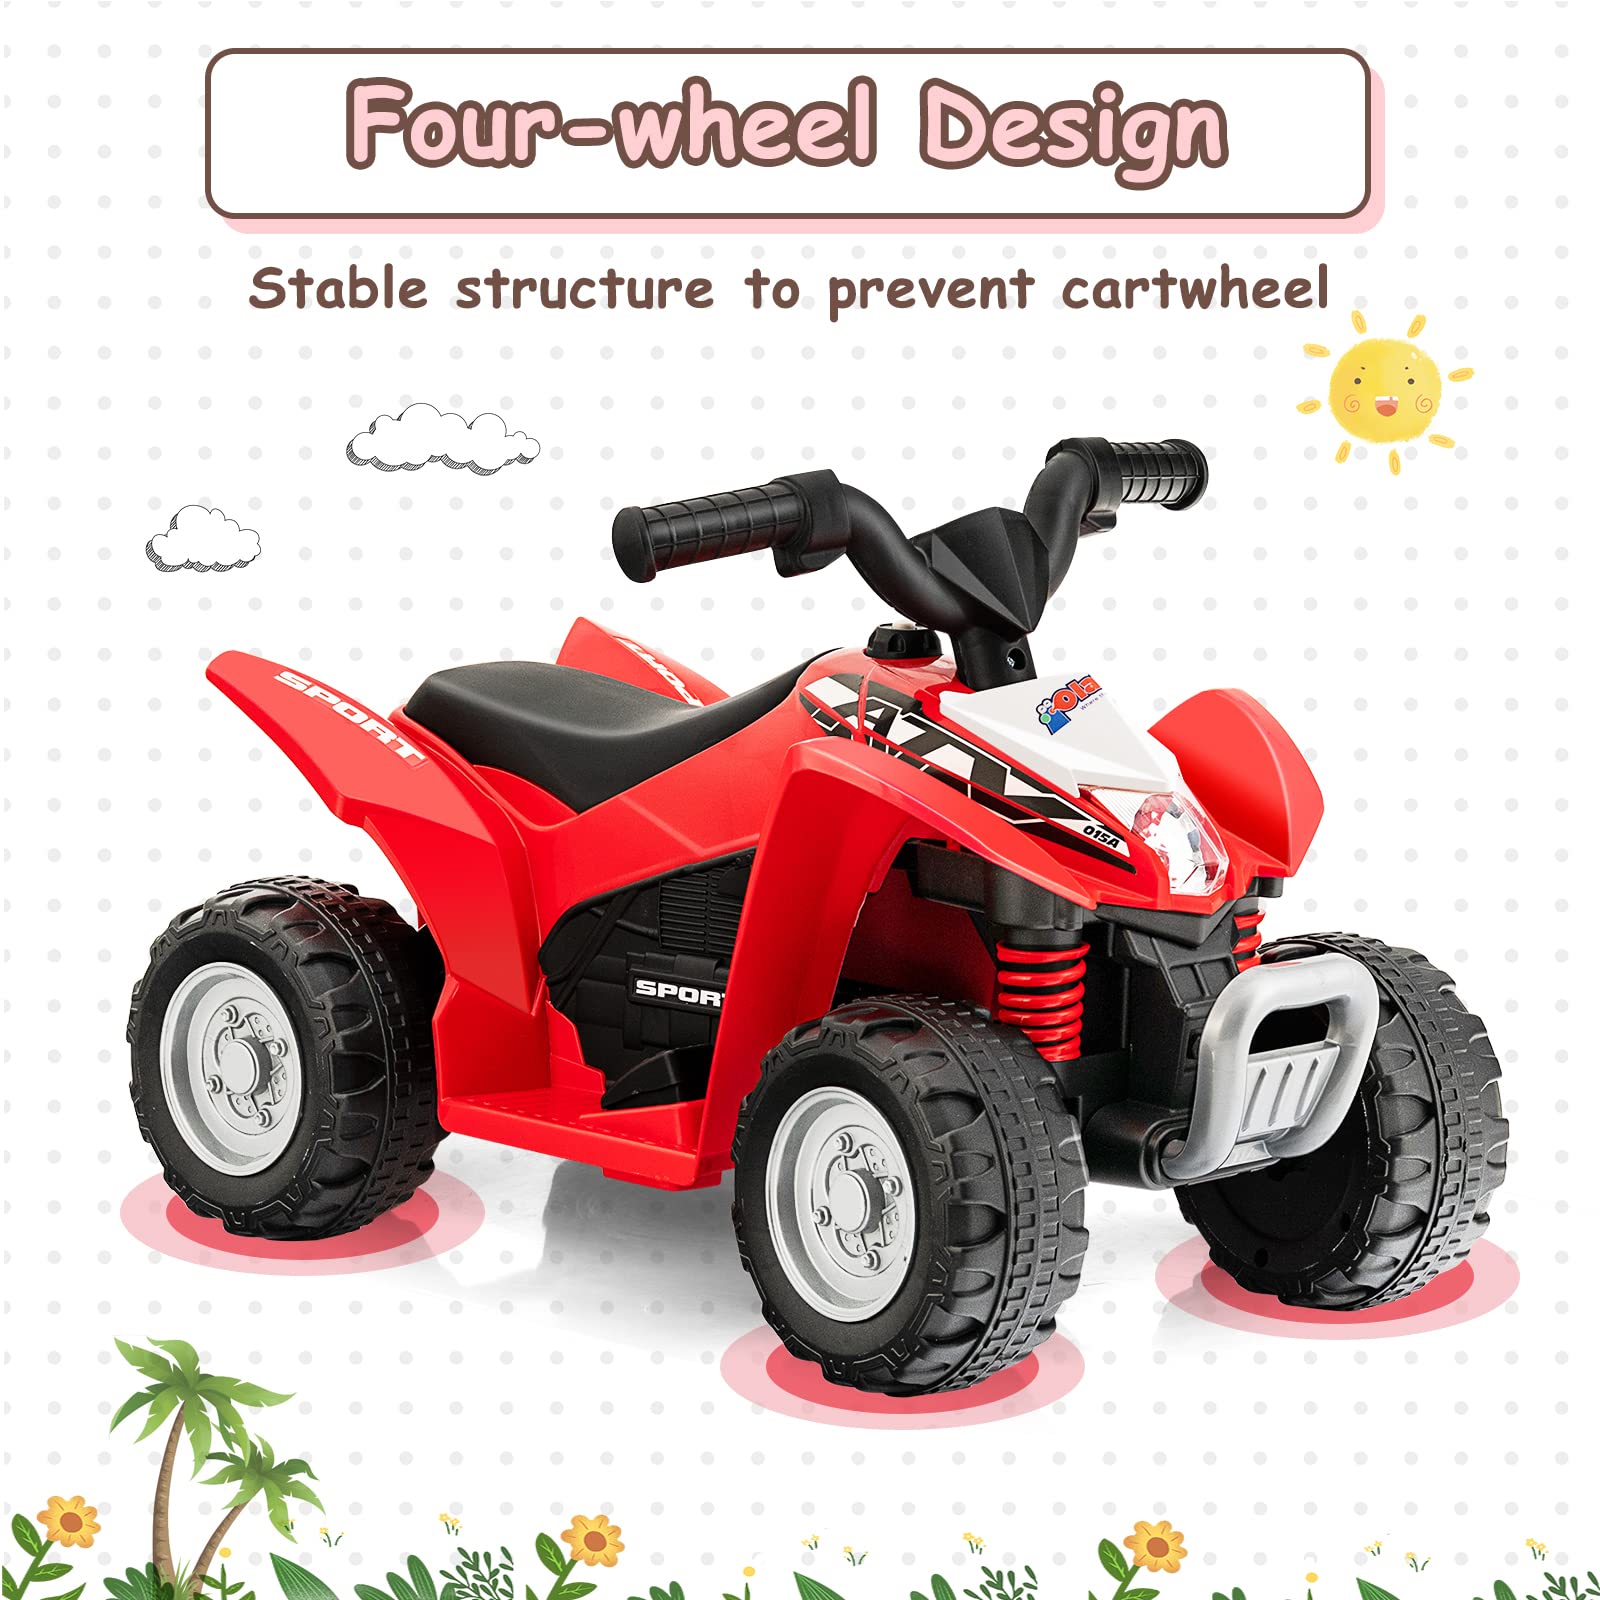 OLAKIDS Kids Ride on ATV, 6V Electric Vehicle for Toddlers, 4 Wheeler